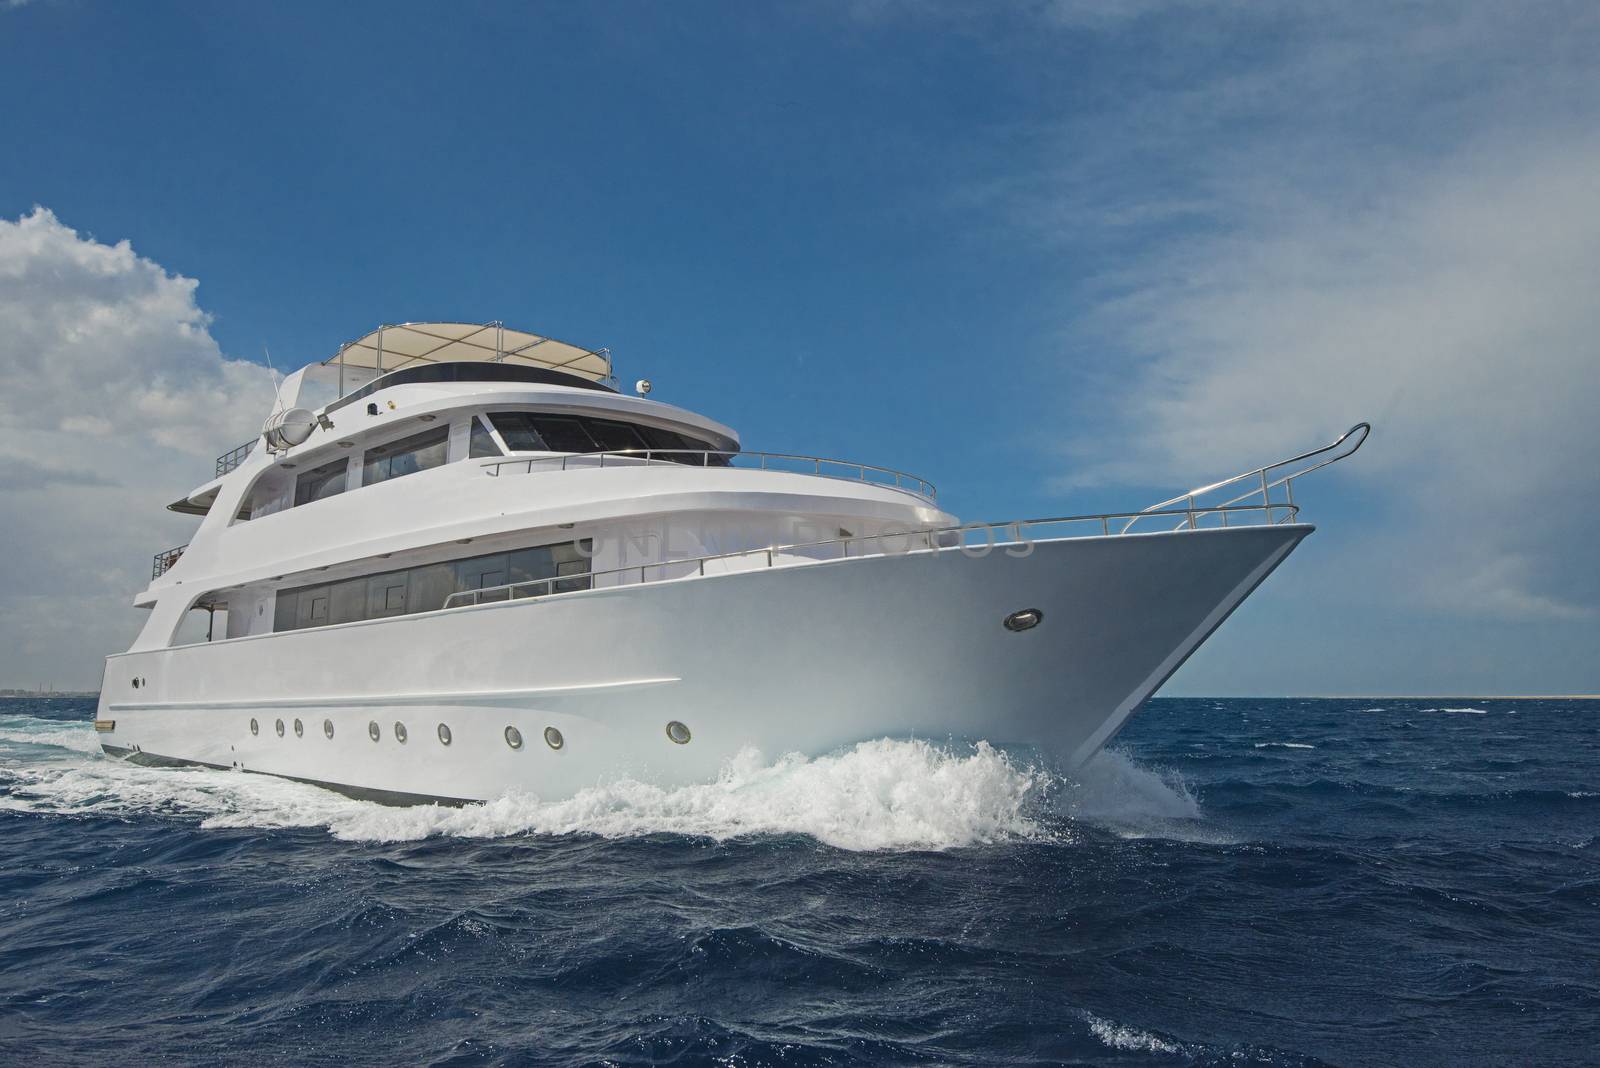 Large luxury motor yacht under way sailing out on tropical sea ocean with cloudy sky background